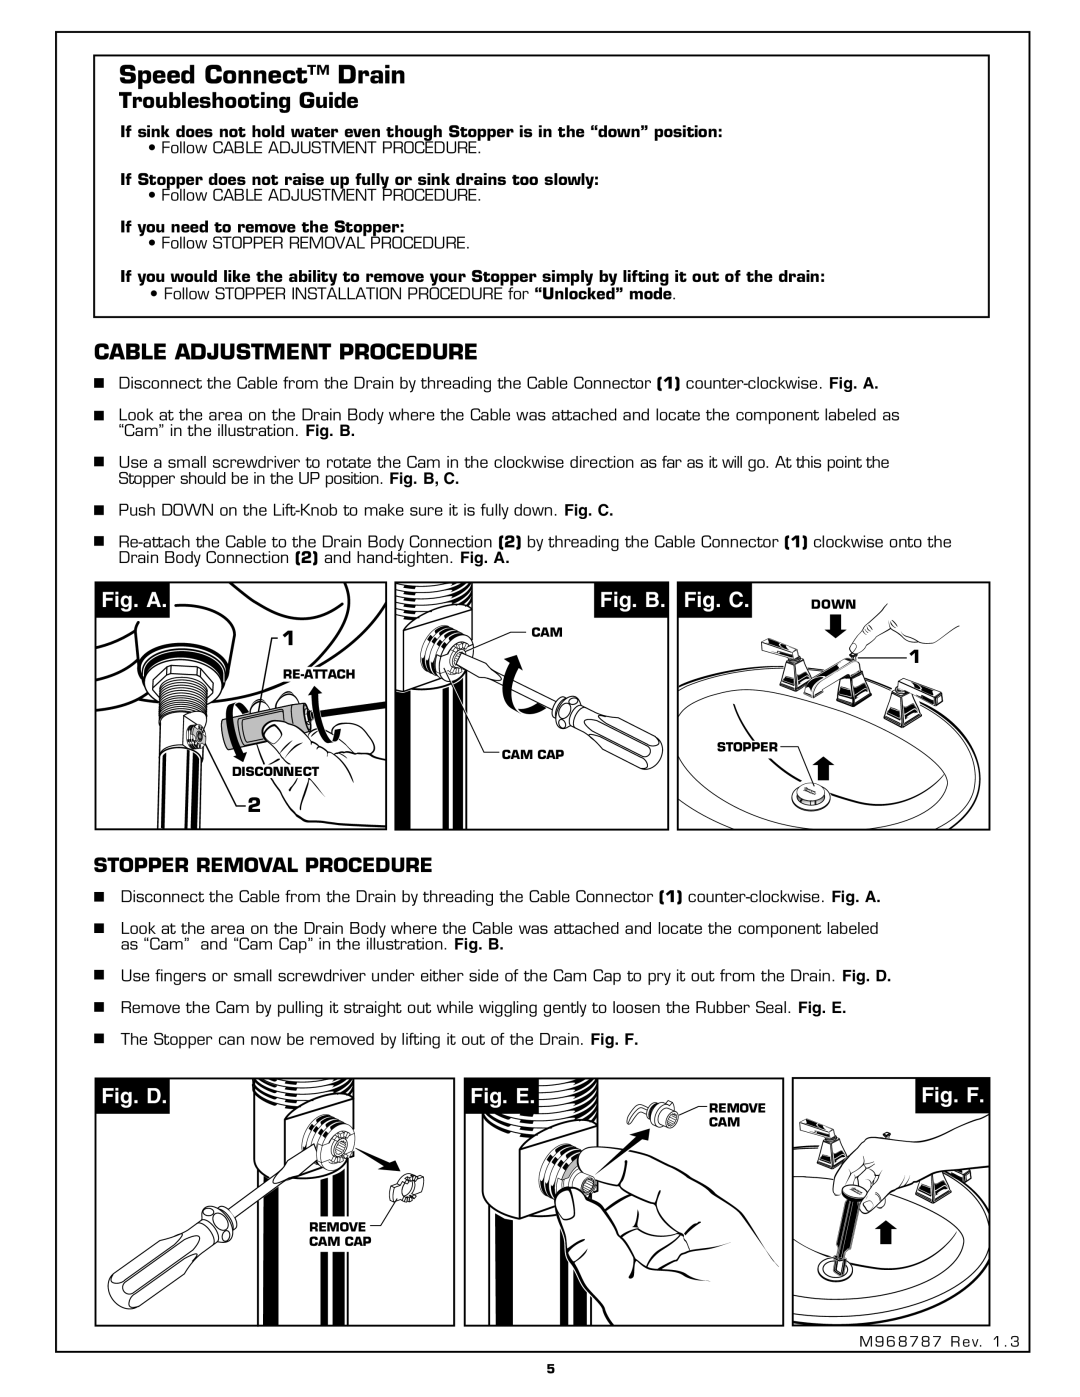 American Standard 2555.801 Troubleshooting Guide, Cable Adjustment Procedure, Fig. A, Fig. B. Fig. C, Fig. D, Fig. E 